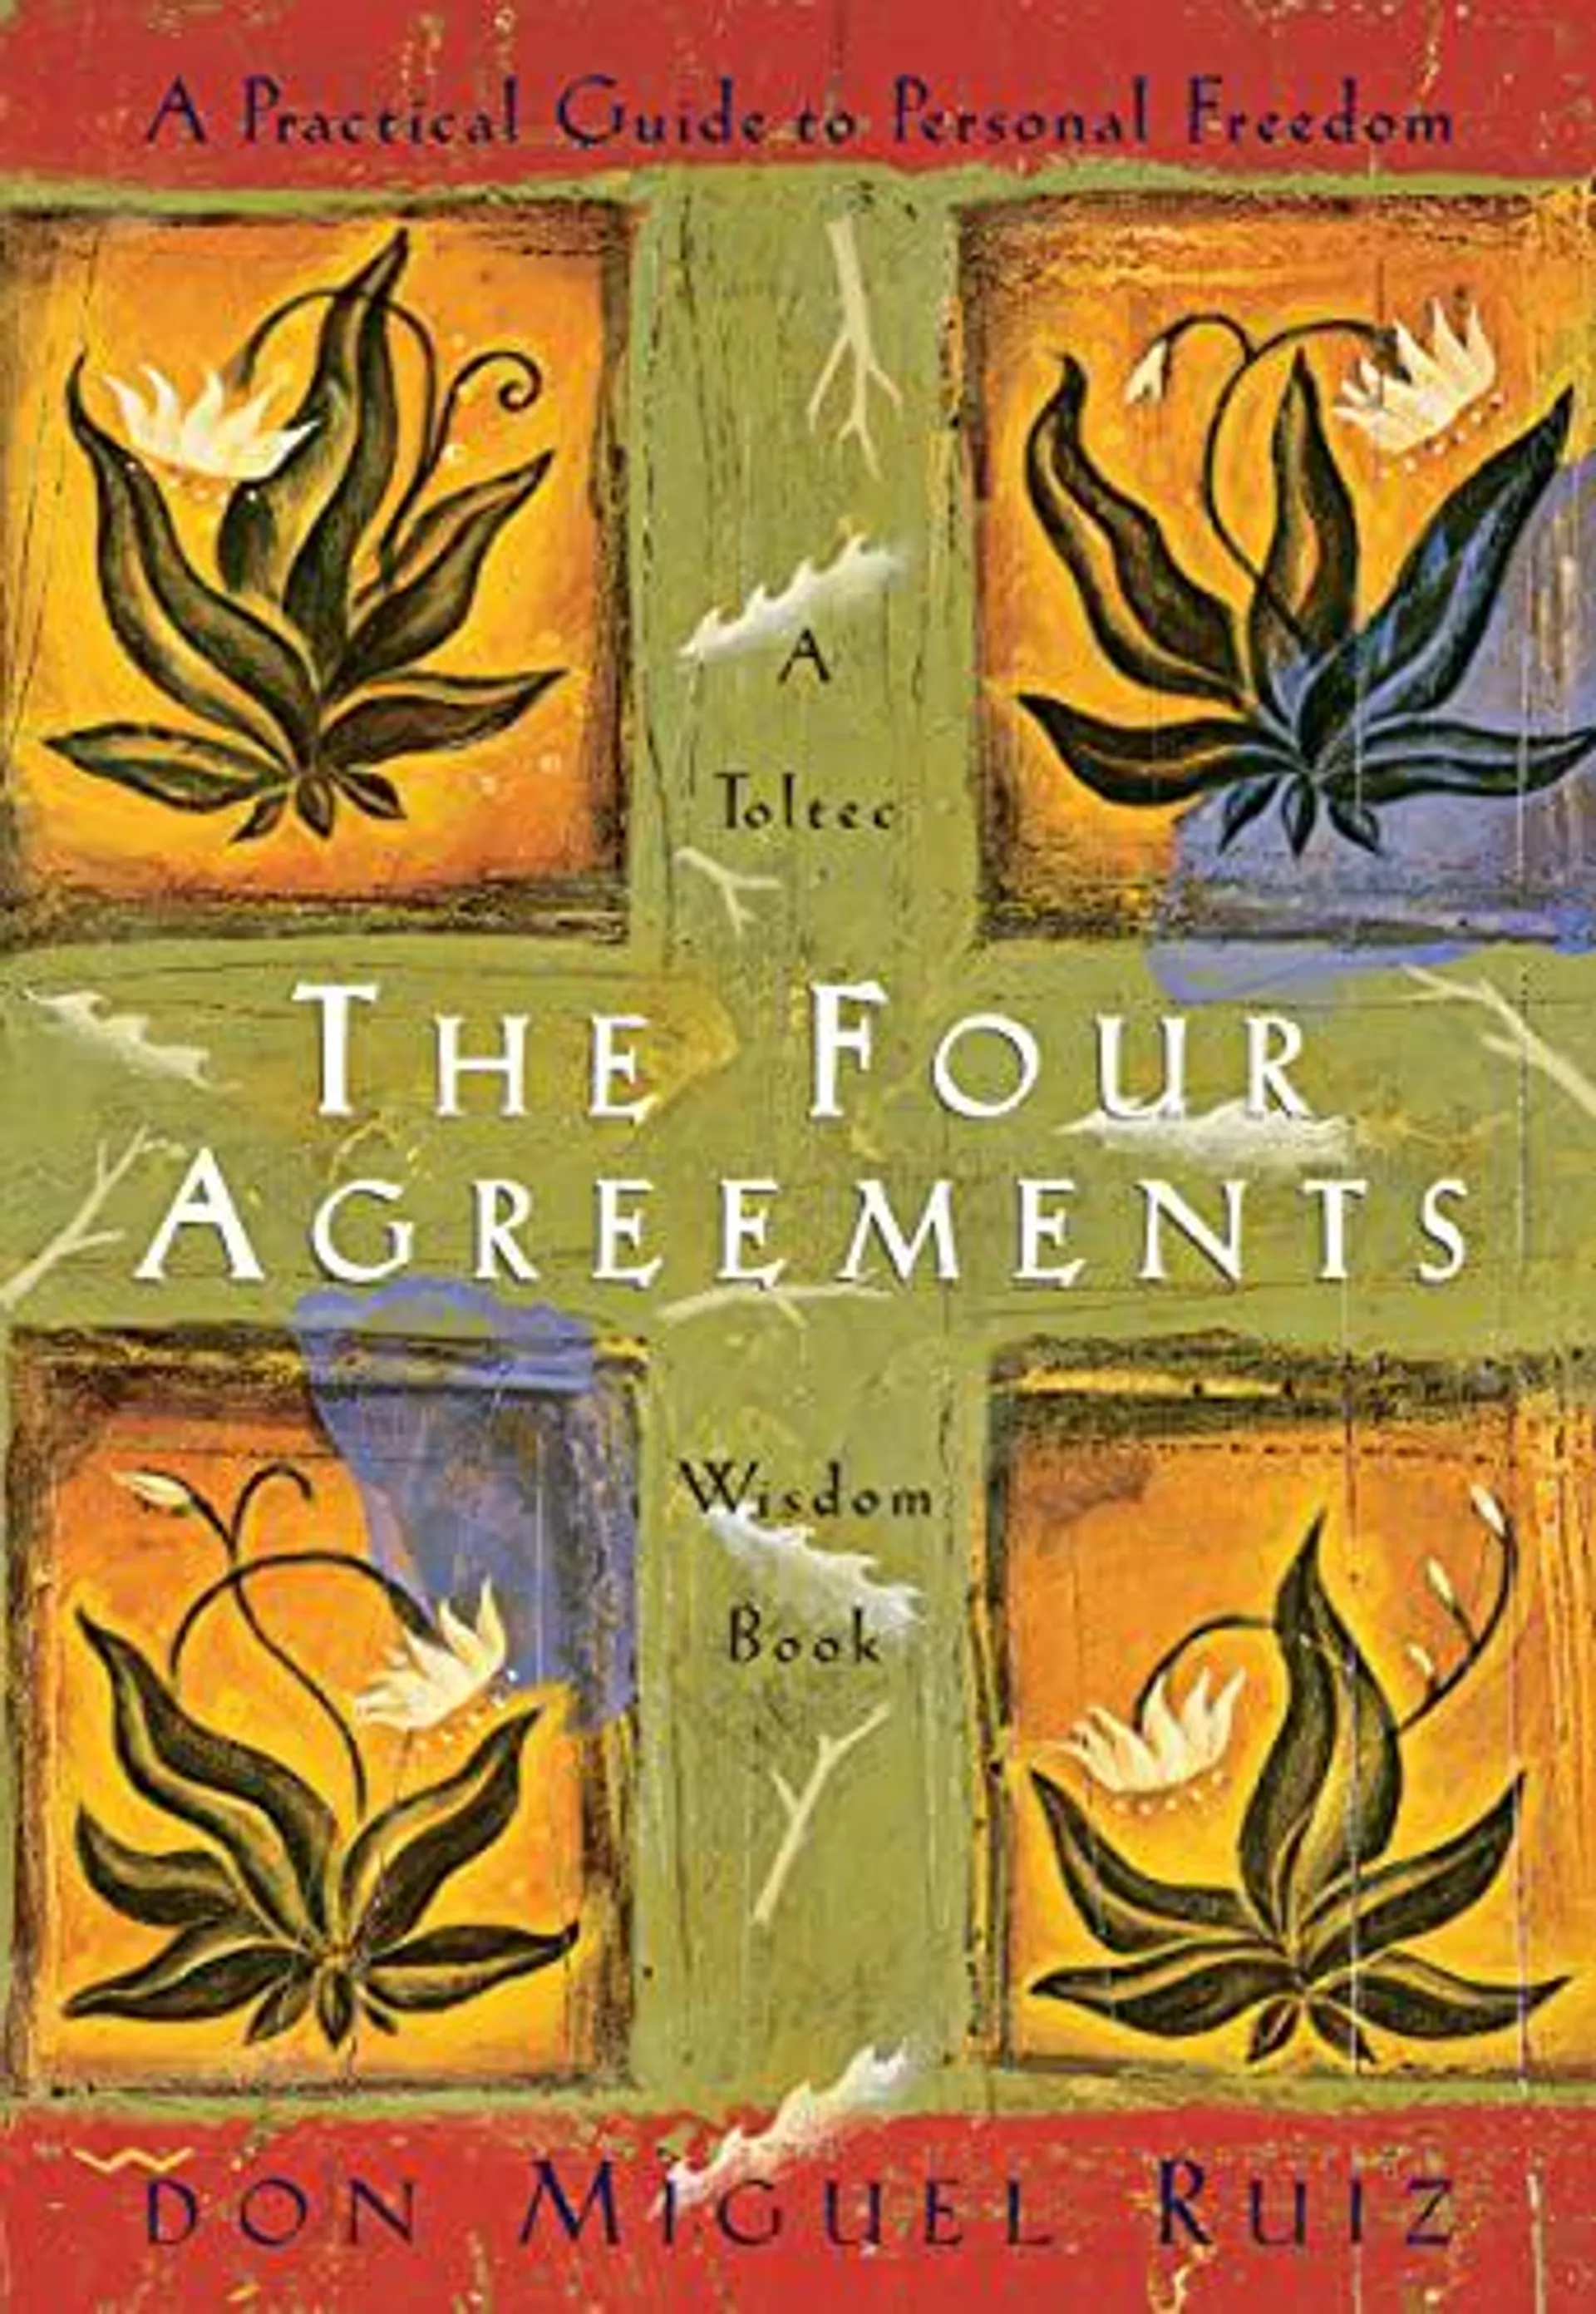 The Four Agreements by Don Miguel Ruiz, Jr.